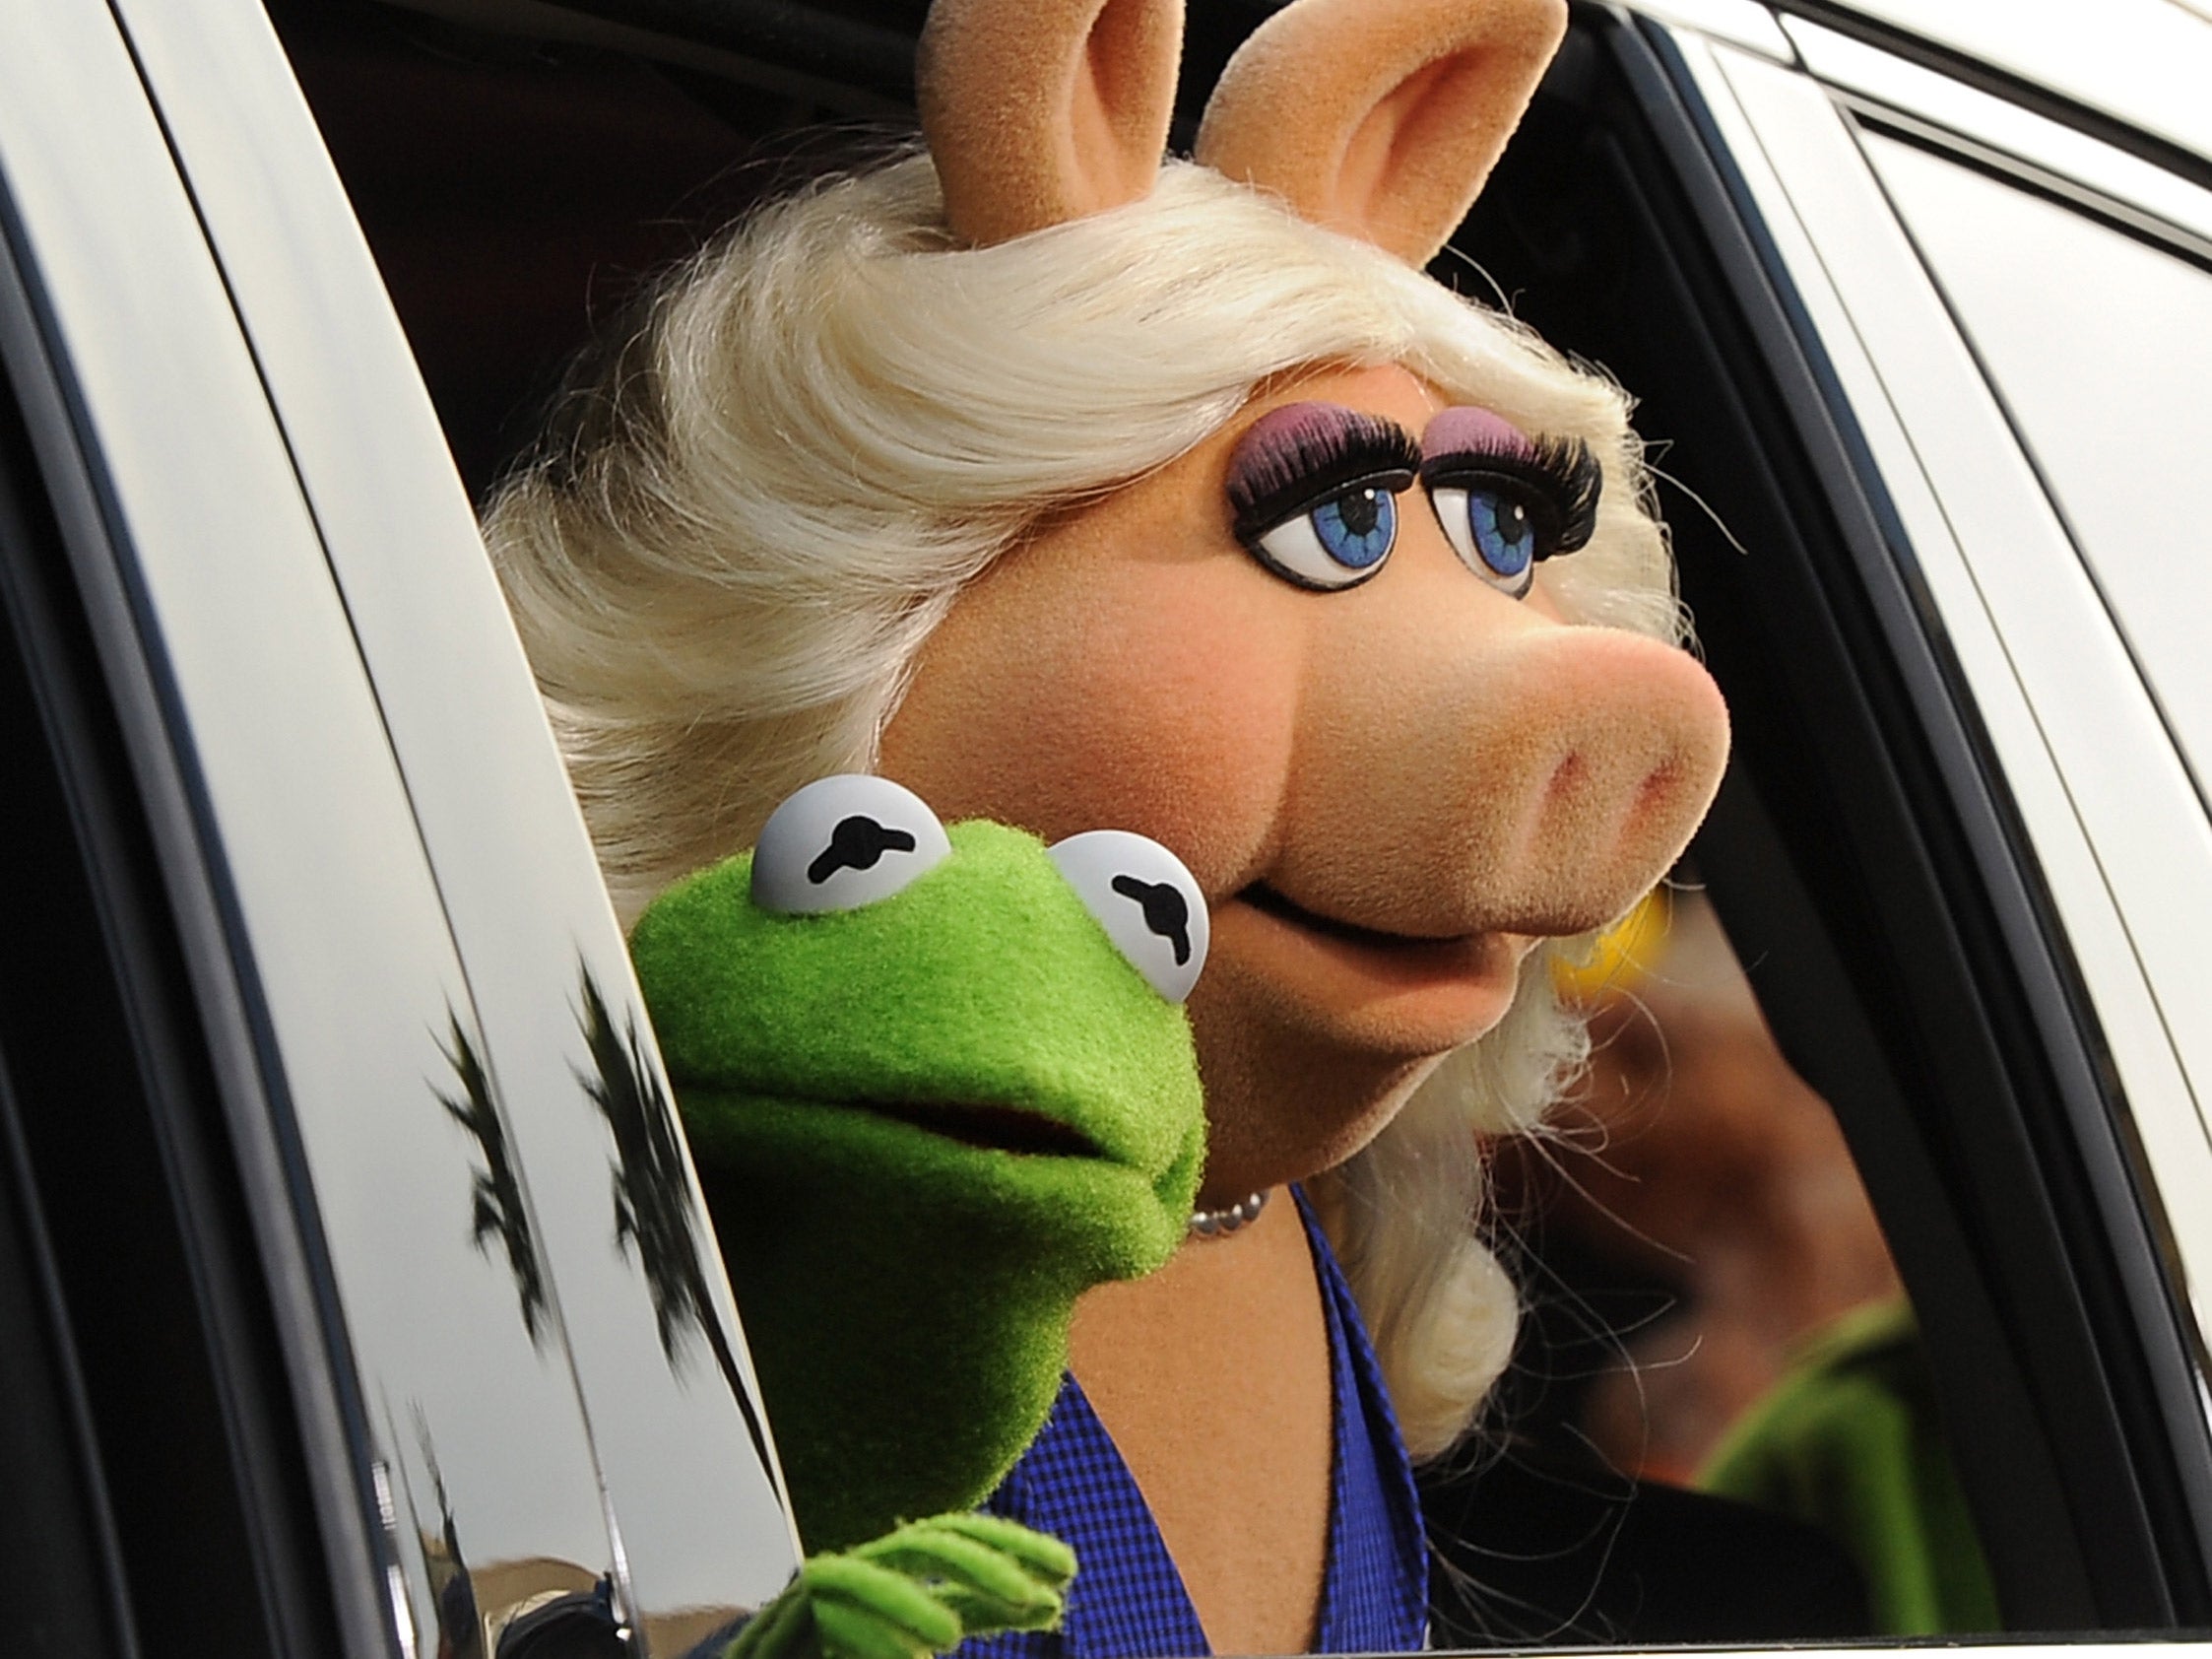 The split with Miss Piggy brings an end to a near 40-year romance that has underpinned much of their work together